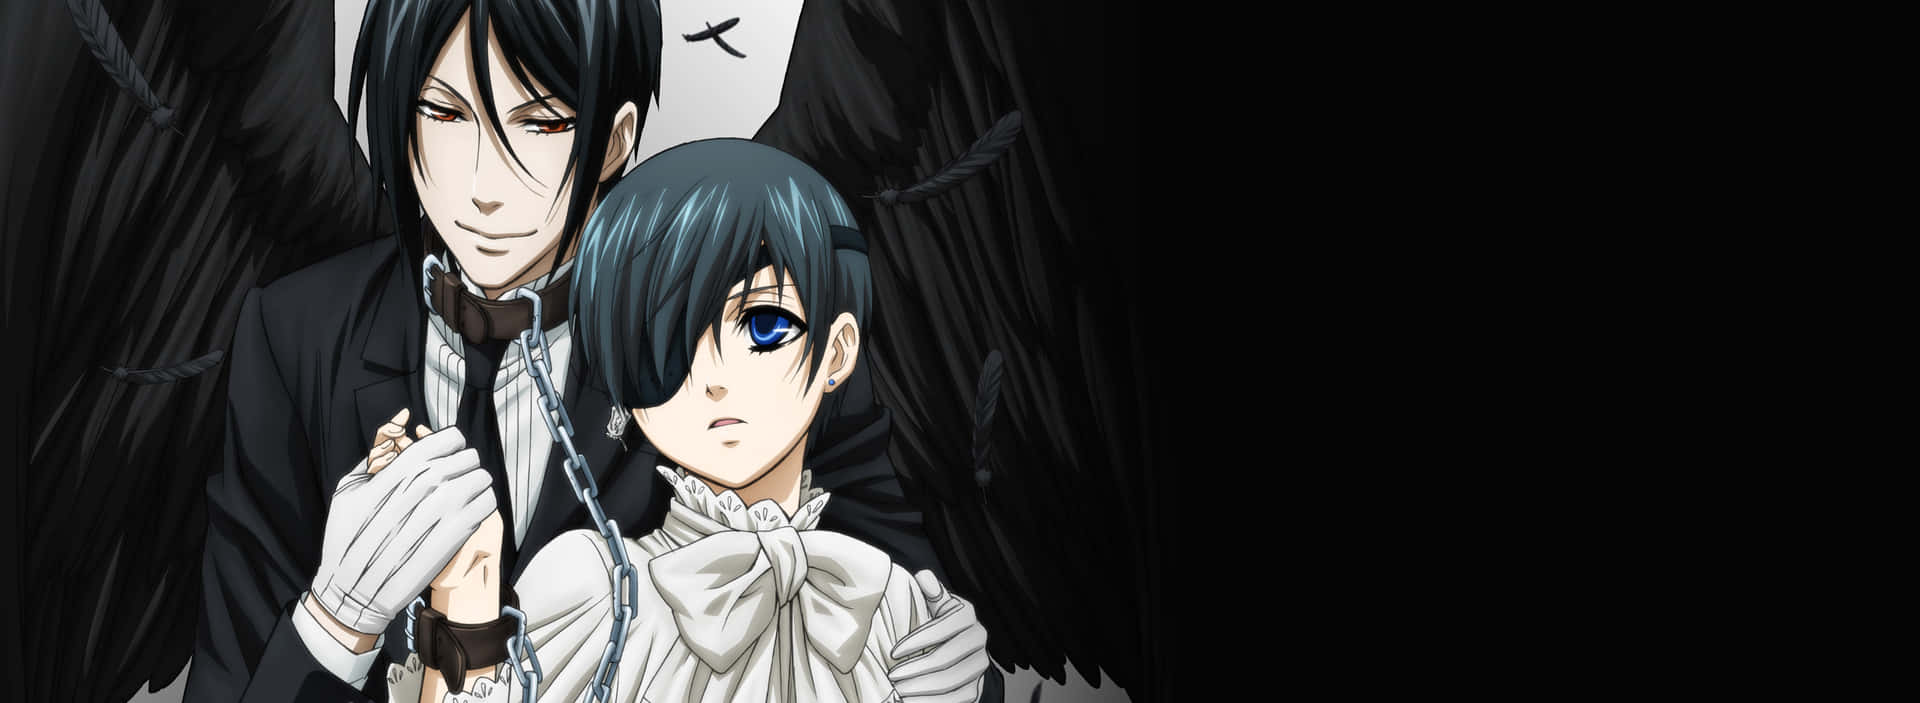 Ciel Phantomhive, The Aristocratic Young Earl Background